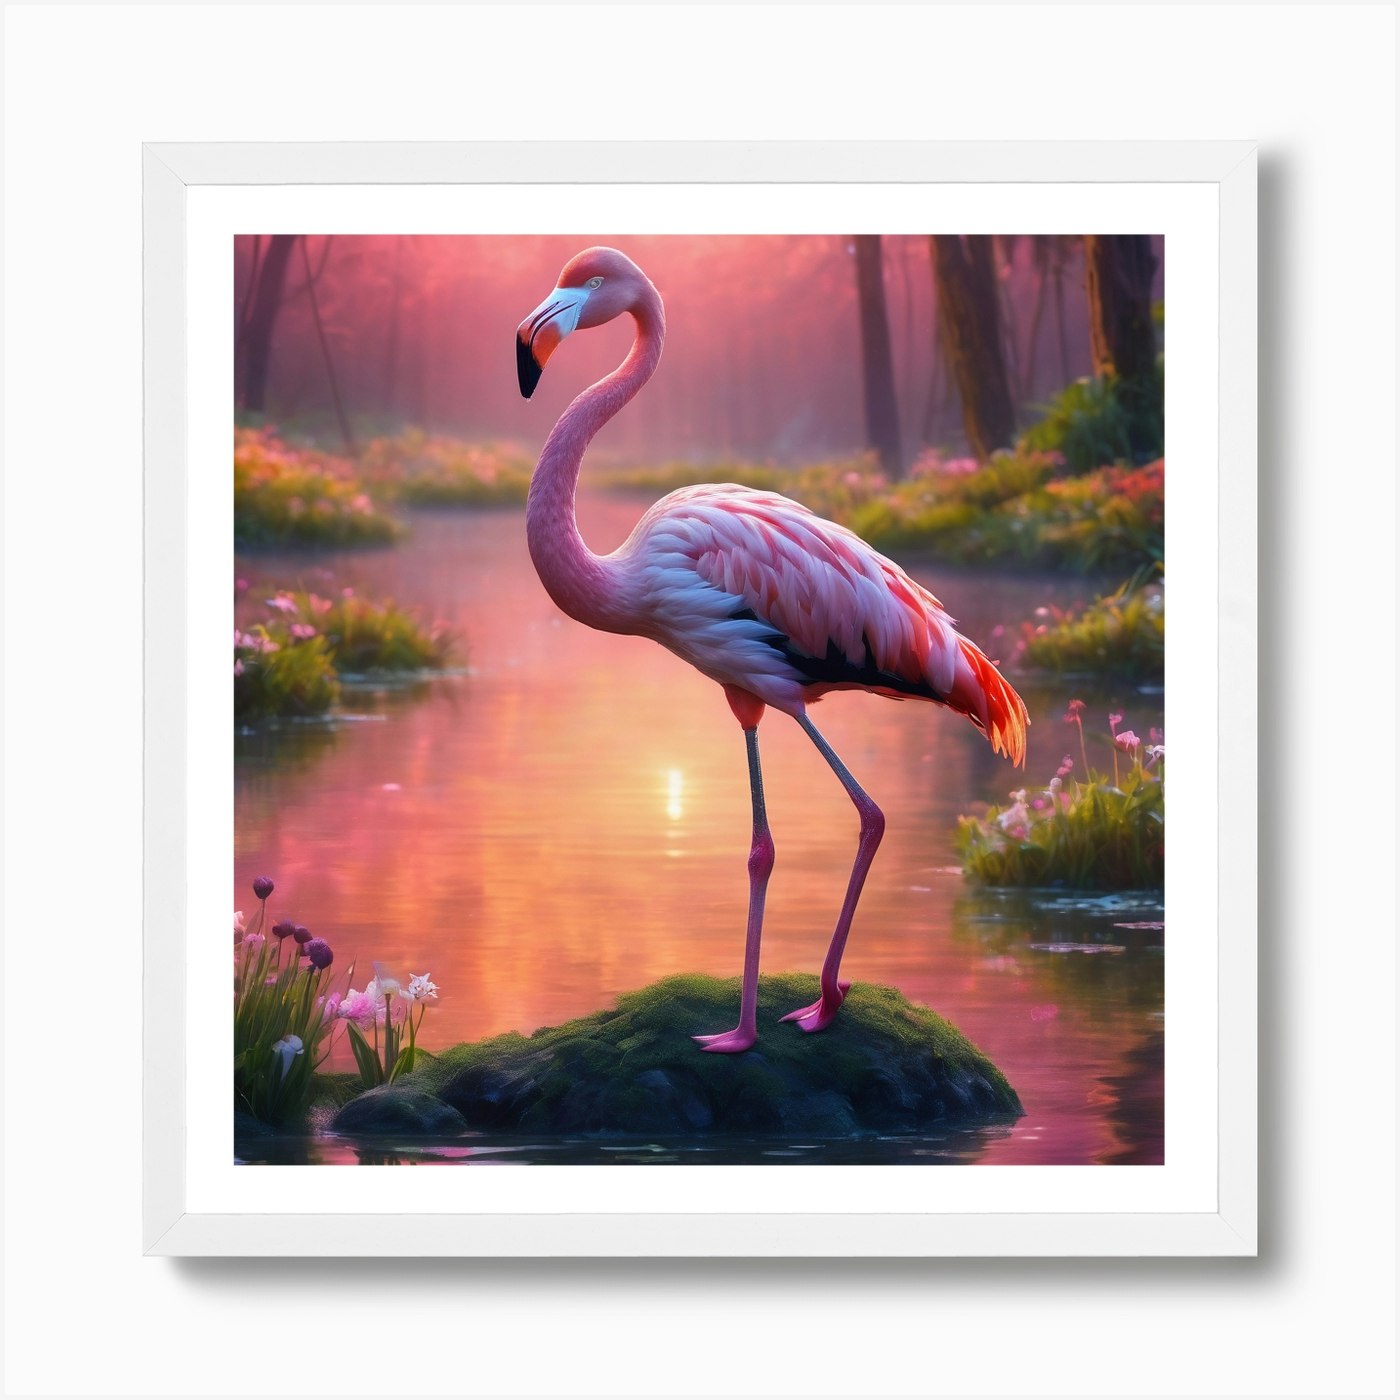 Pink Flamingo In Forest At Sunset Art Print